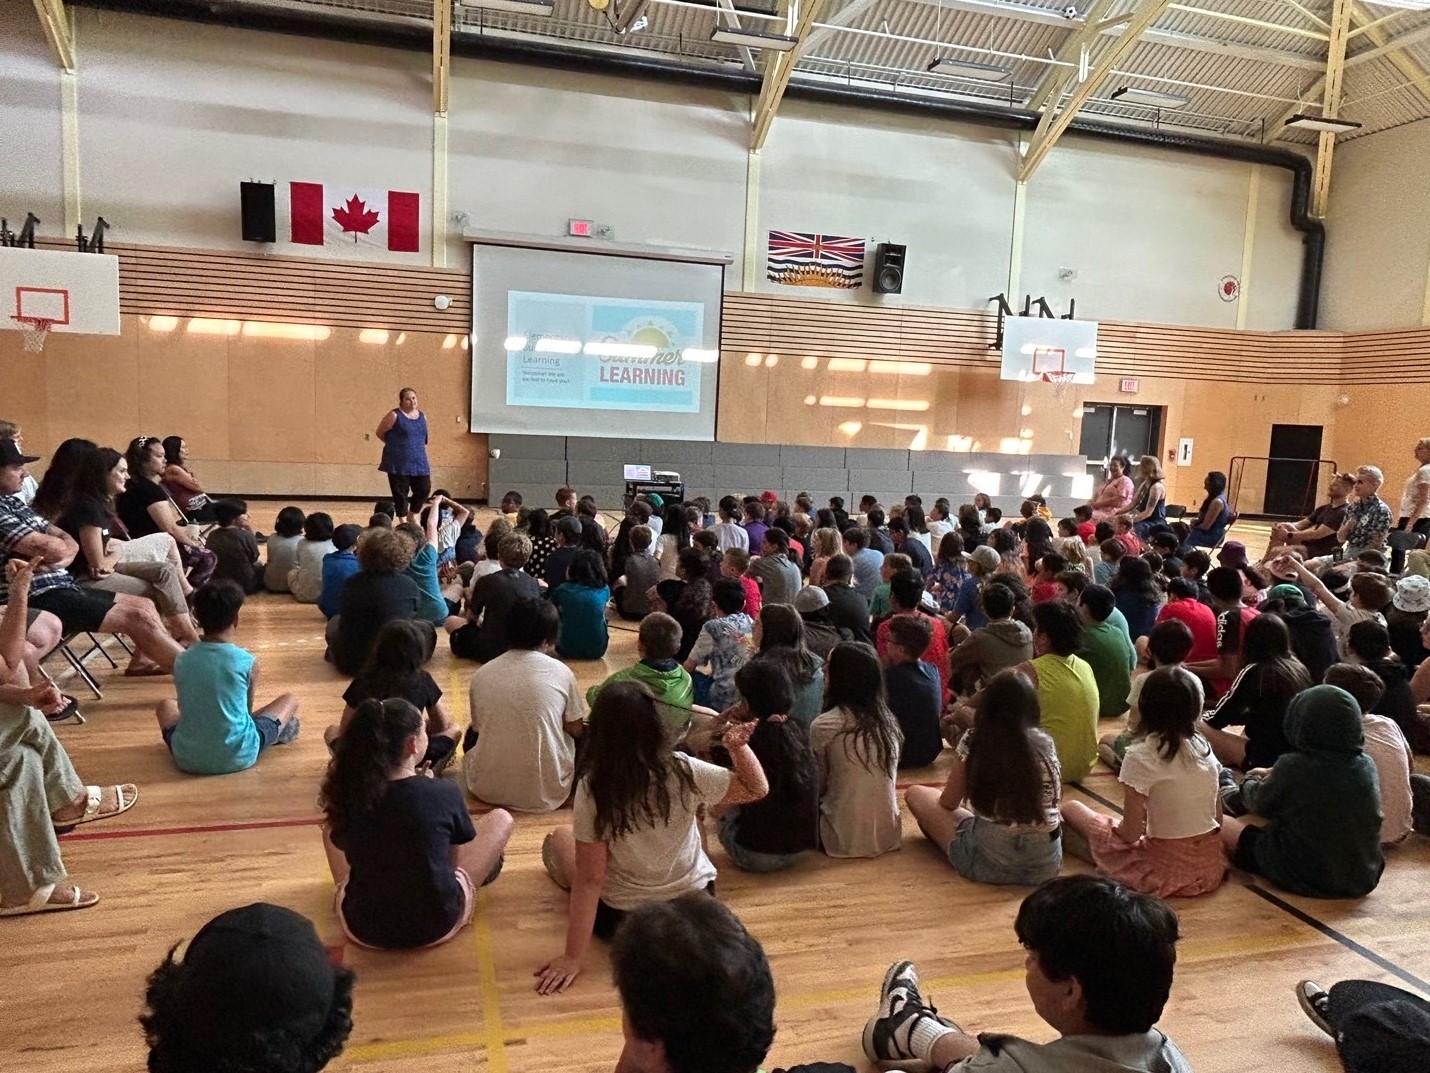 Students gather sitting on a gym floor looking at a projected screen that says Summer Learning.